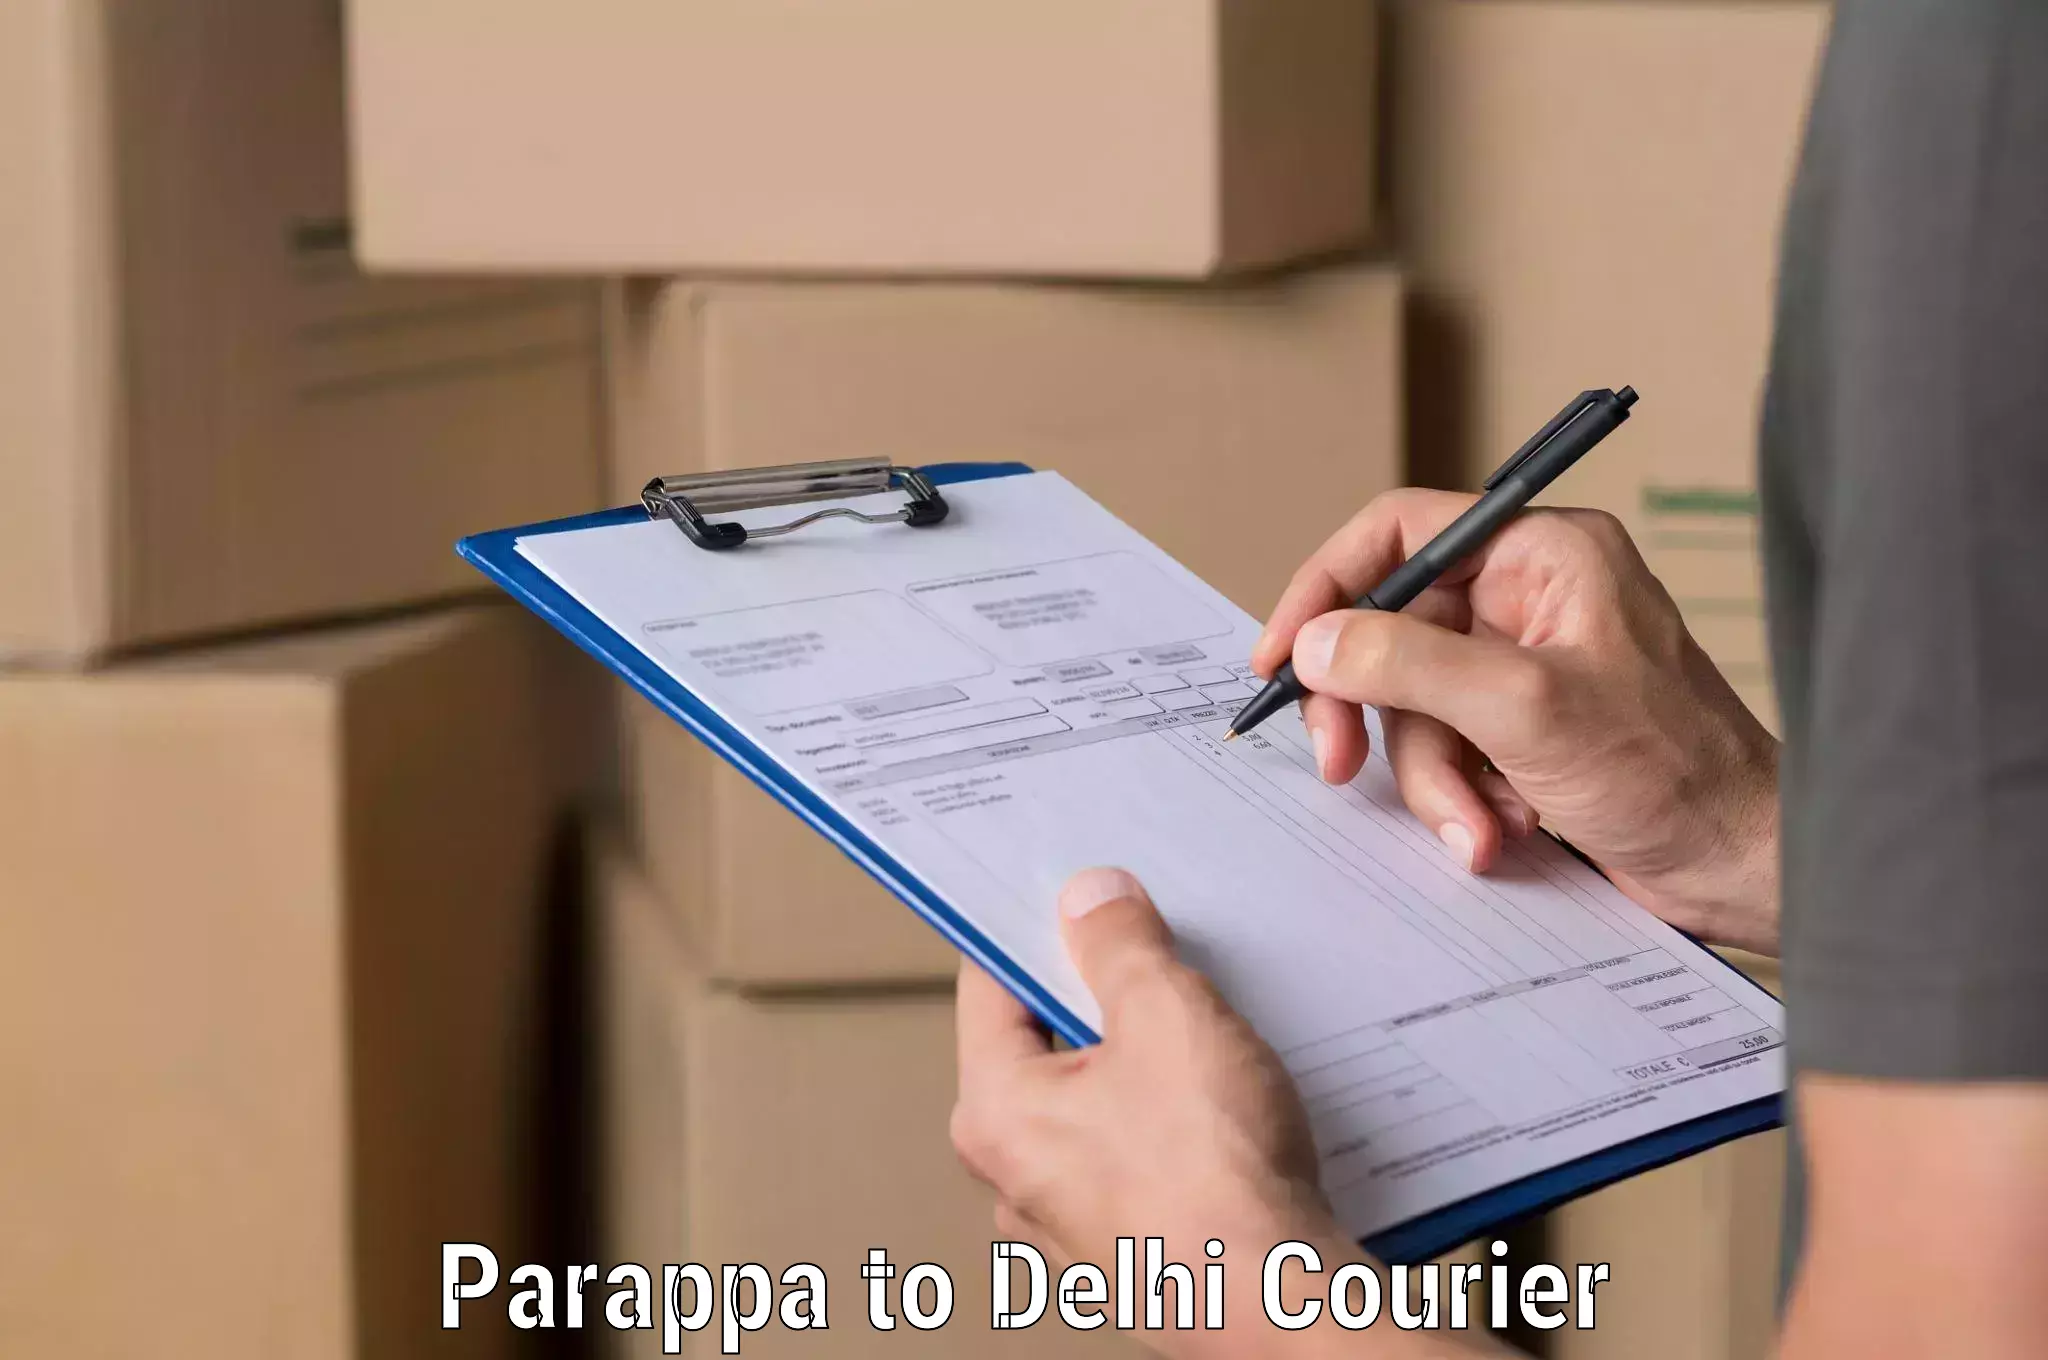 Efficient parcel delivery Parappa to Lodhi Road